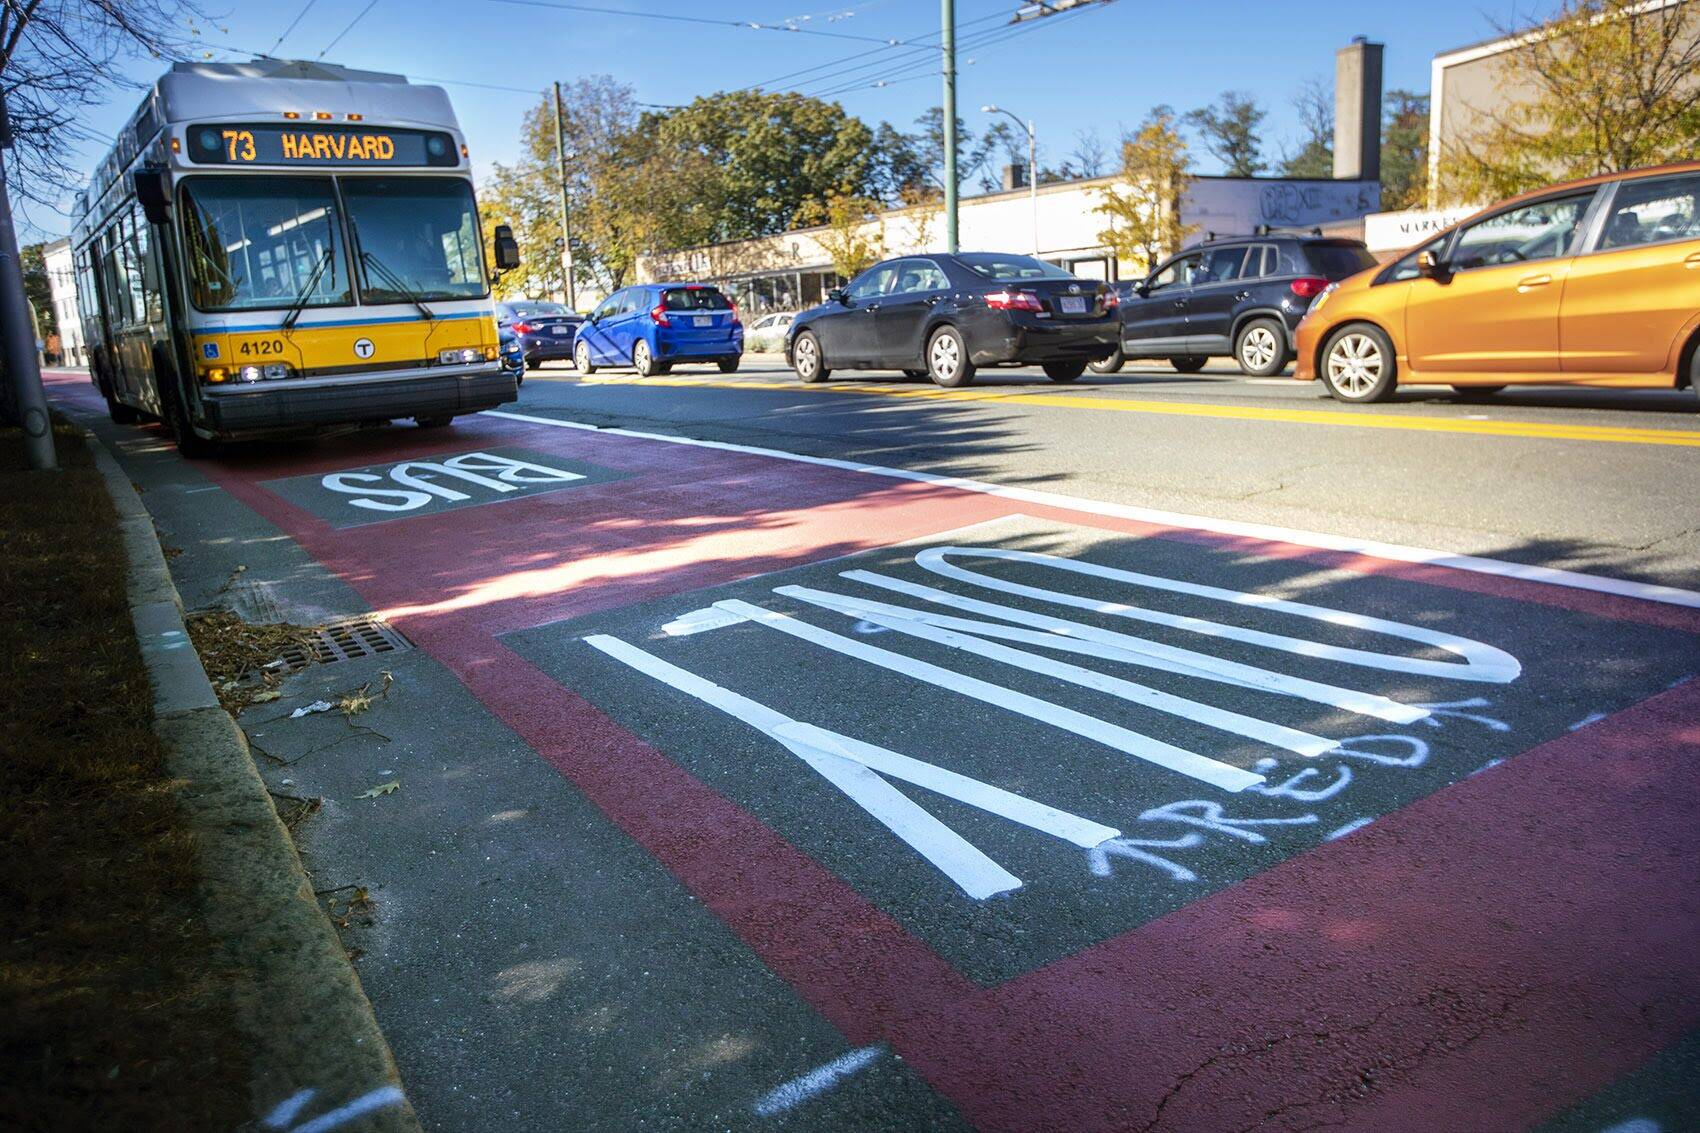 An MBTA bus bound for Harvard Square travels through the red-painted lane restricted for buses and bicycles on Mt. Auburn Street in Cambridge and Watertown. (Jesse Costa/WBUR)